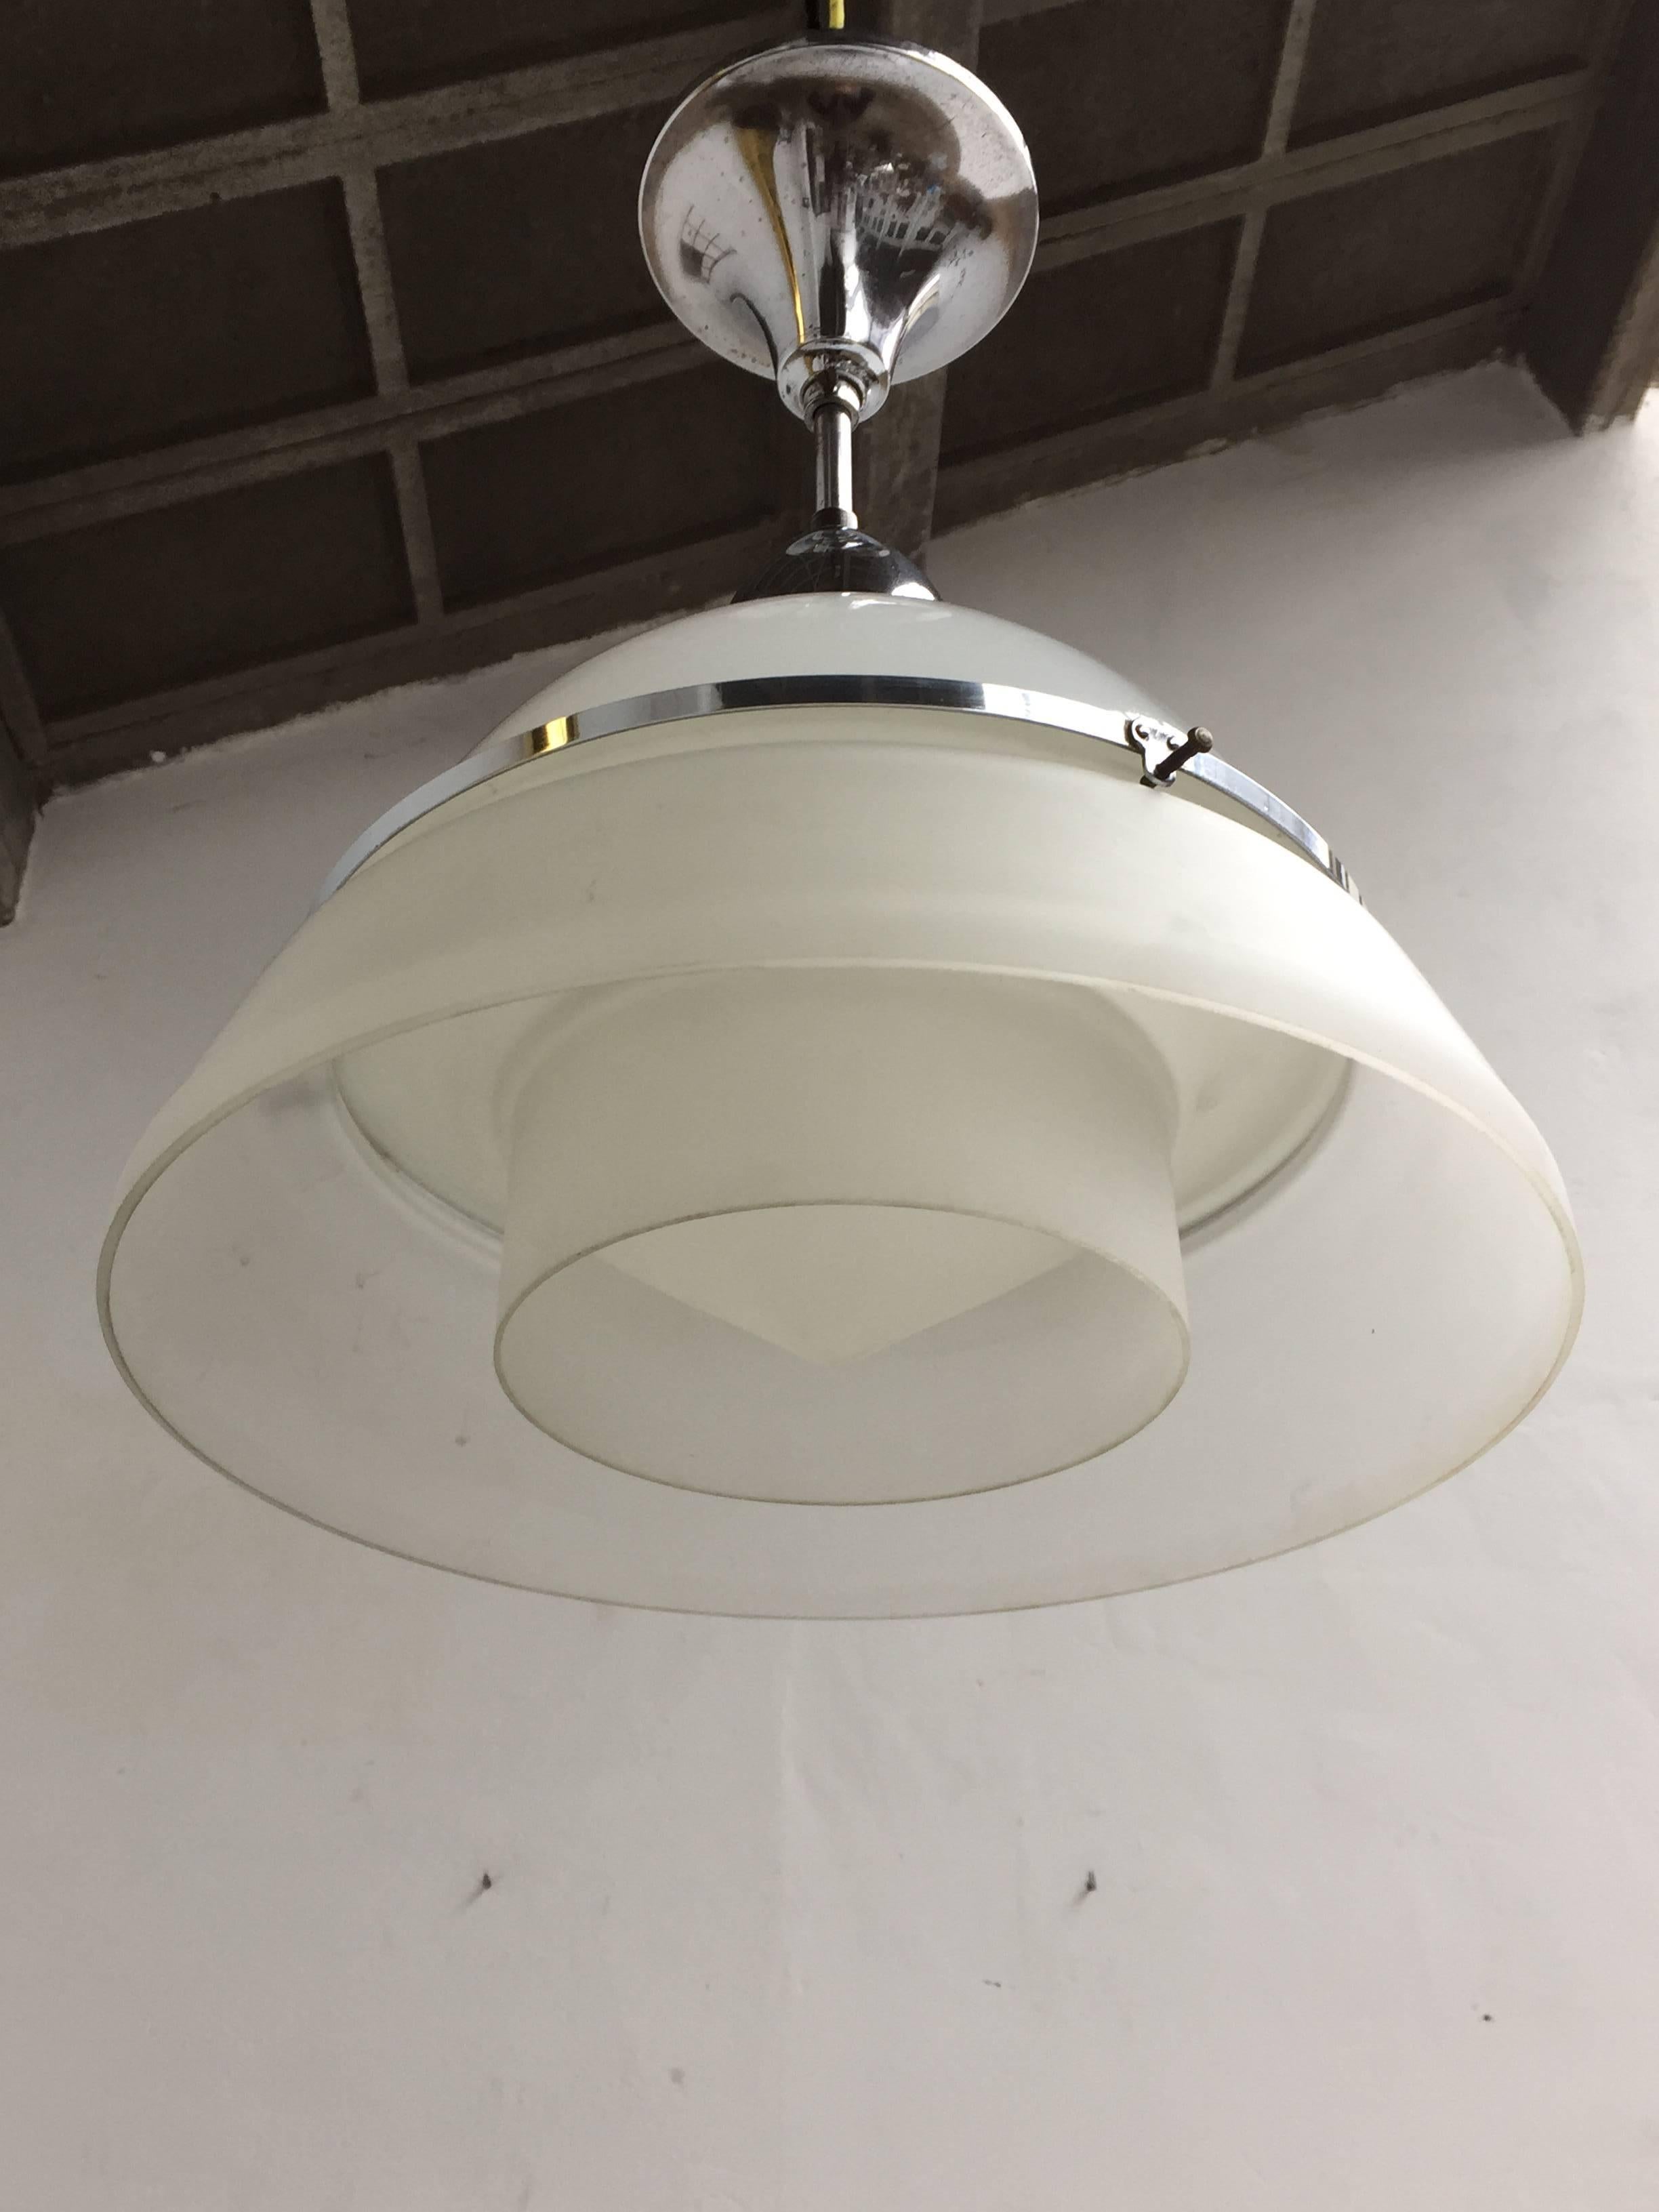 A beautiful original circa 1920s pendant lamp.

This lamp comes from the interior of an amazing Art Nouveau house that was build circa 1900 in Antwerp.

This Art Deco pendant is most likely of French origin and in the style of Georges